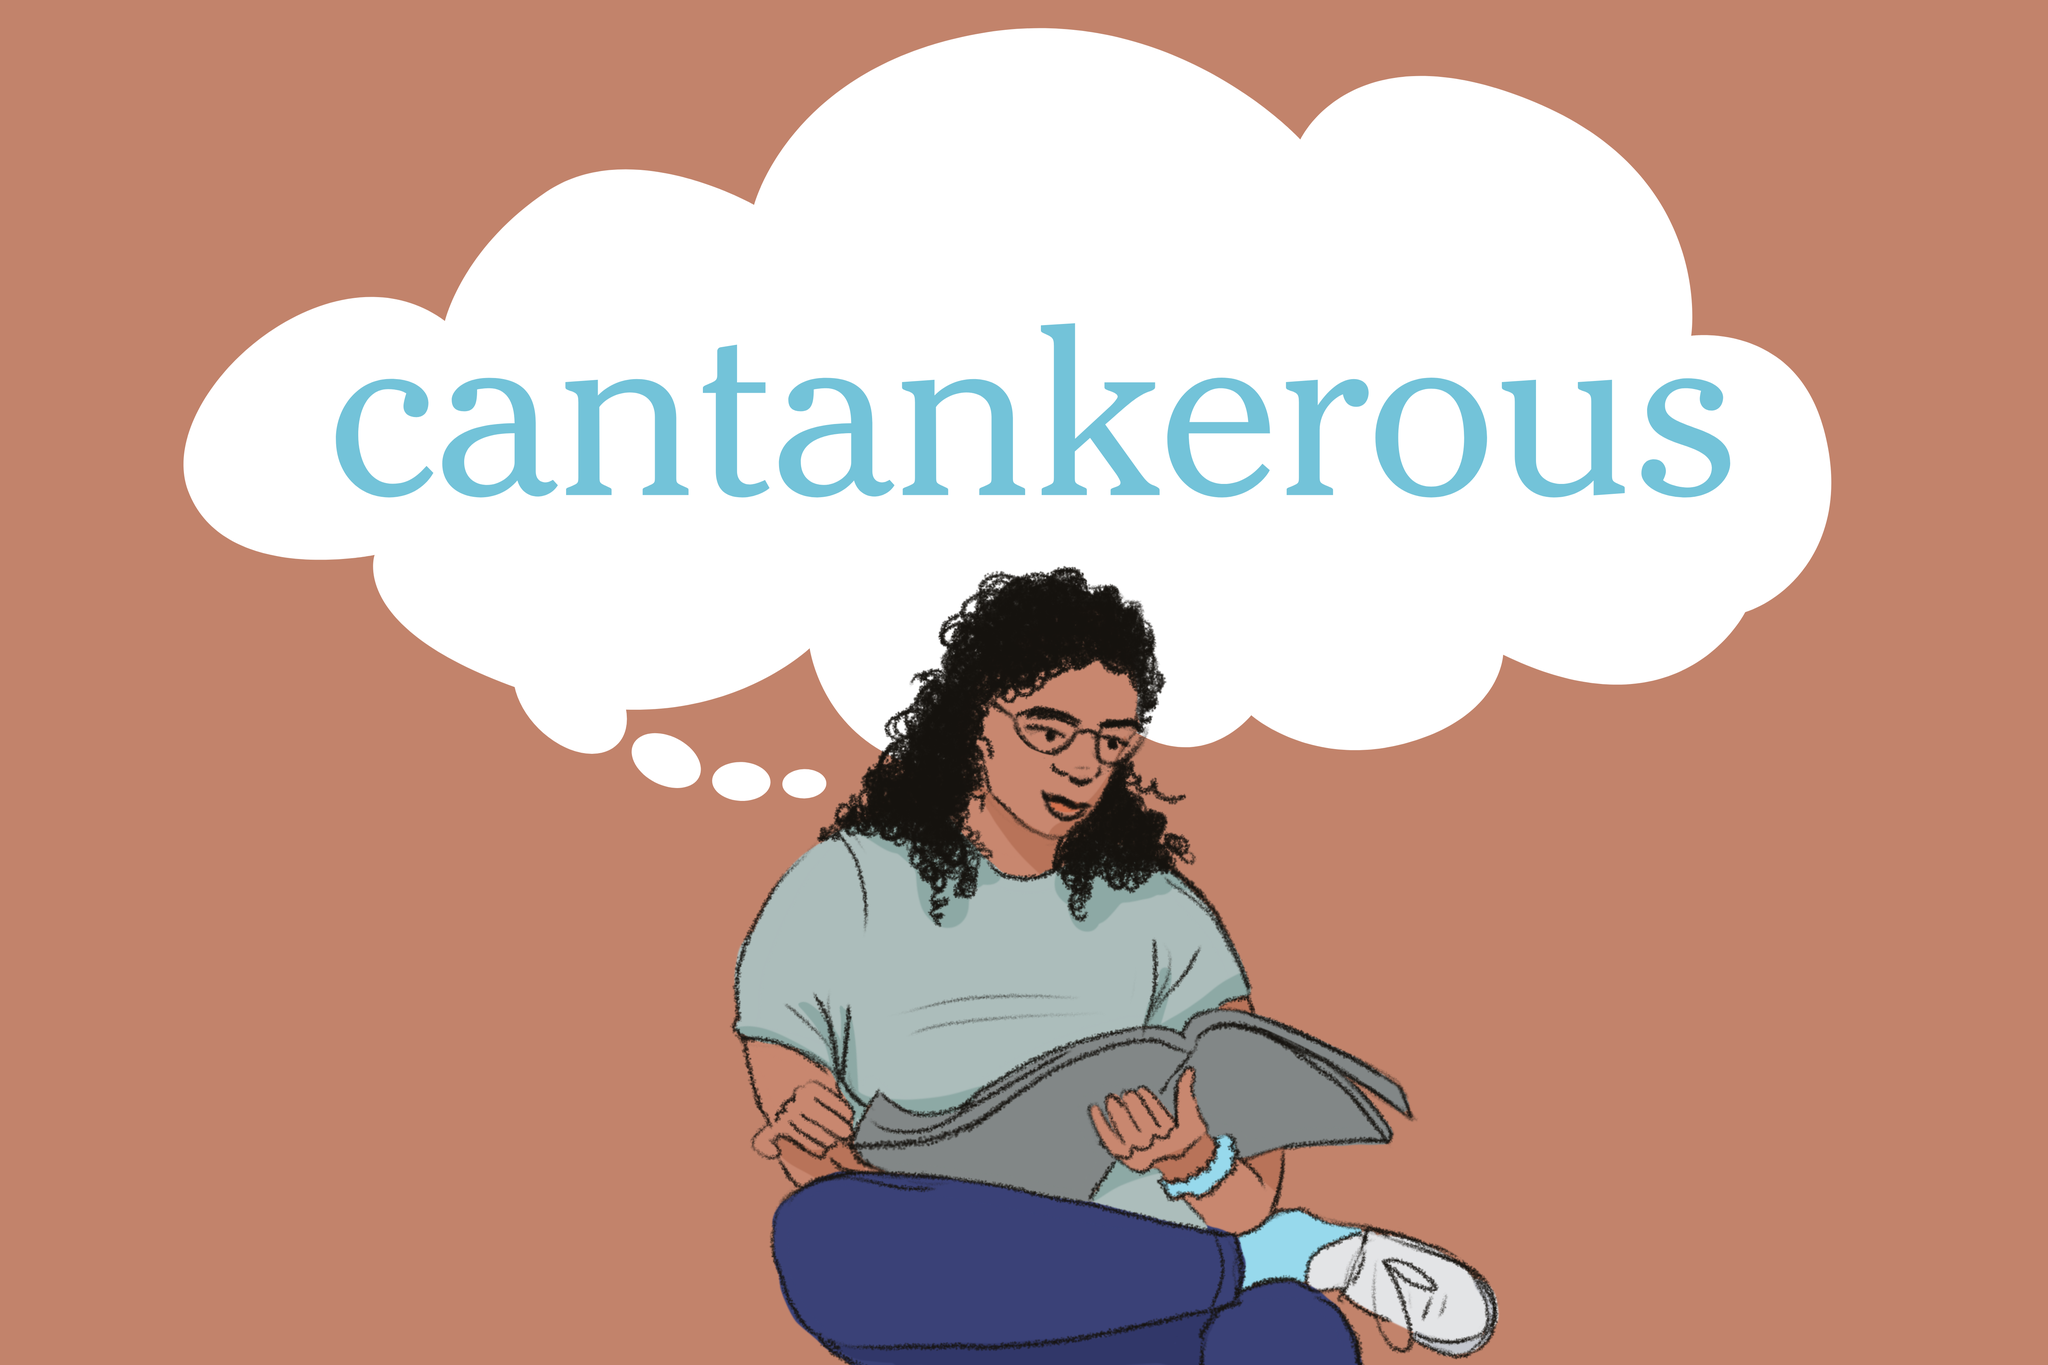 where does the word cantankerous come from and what does cantankerous mean